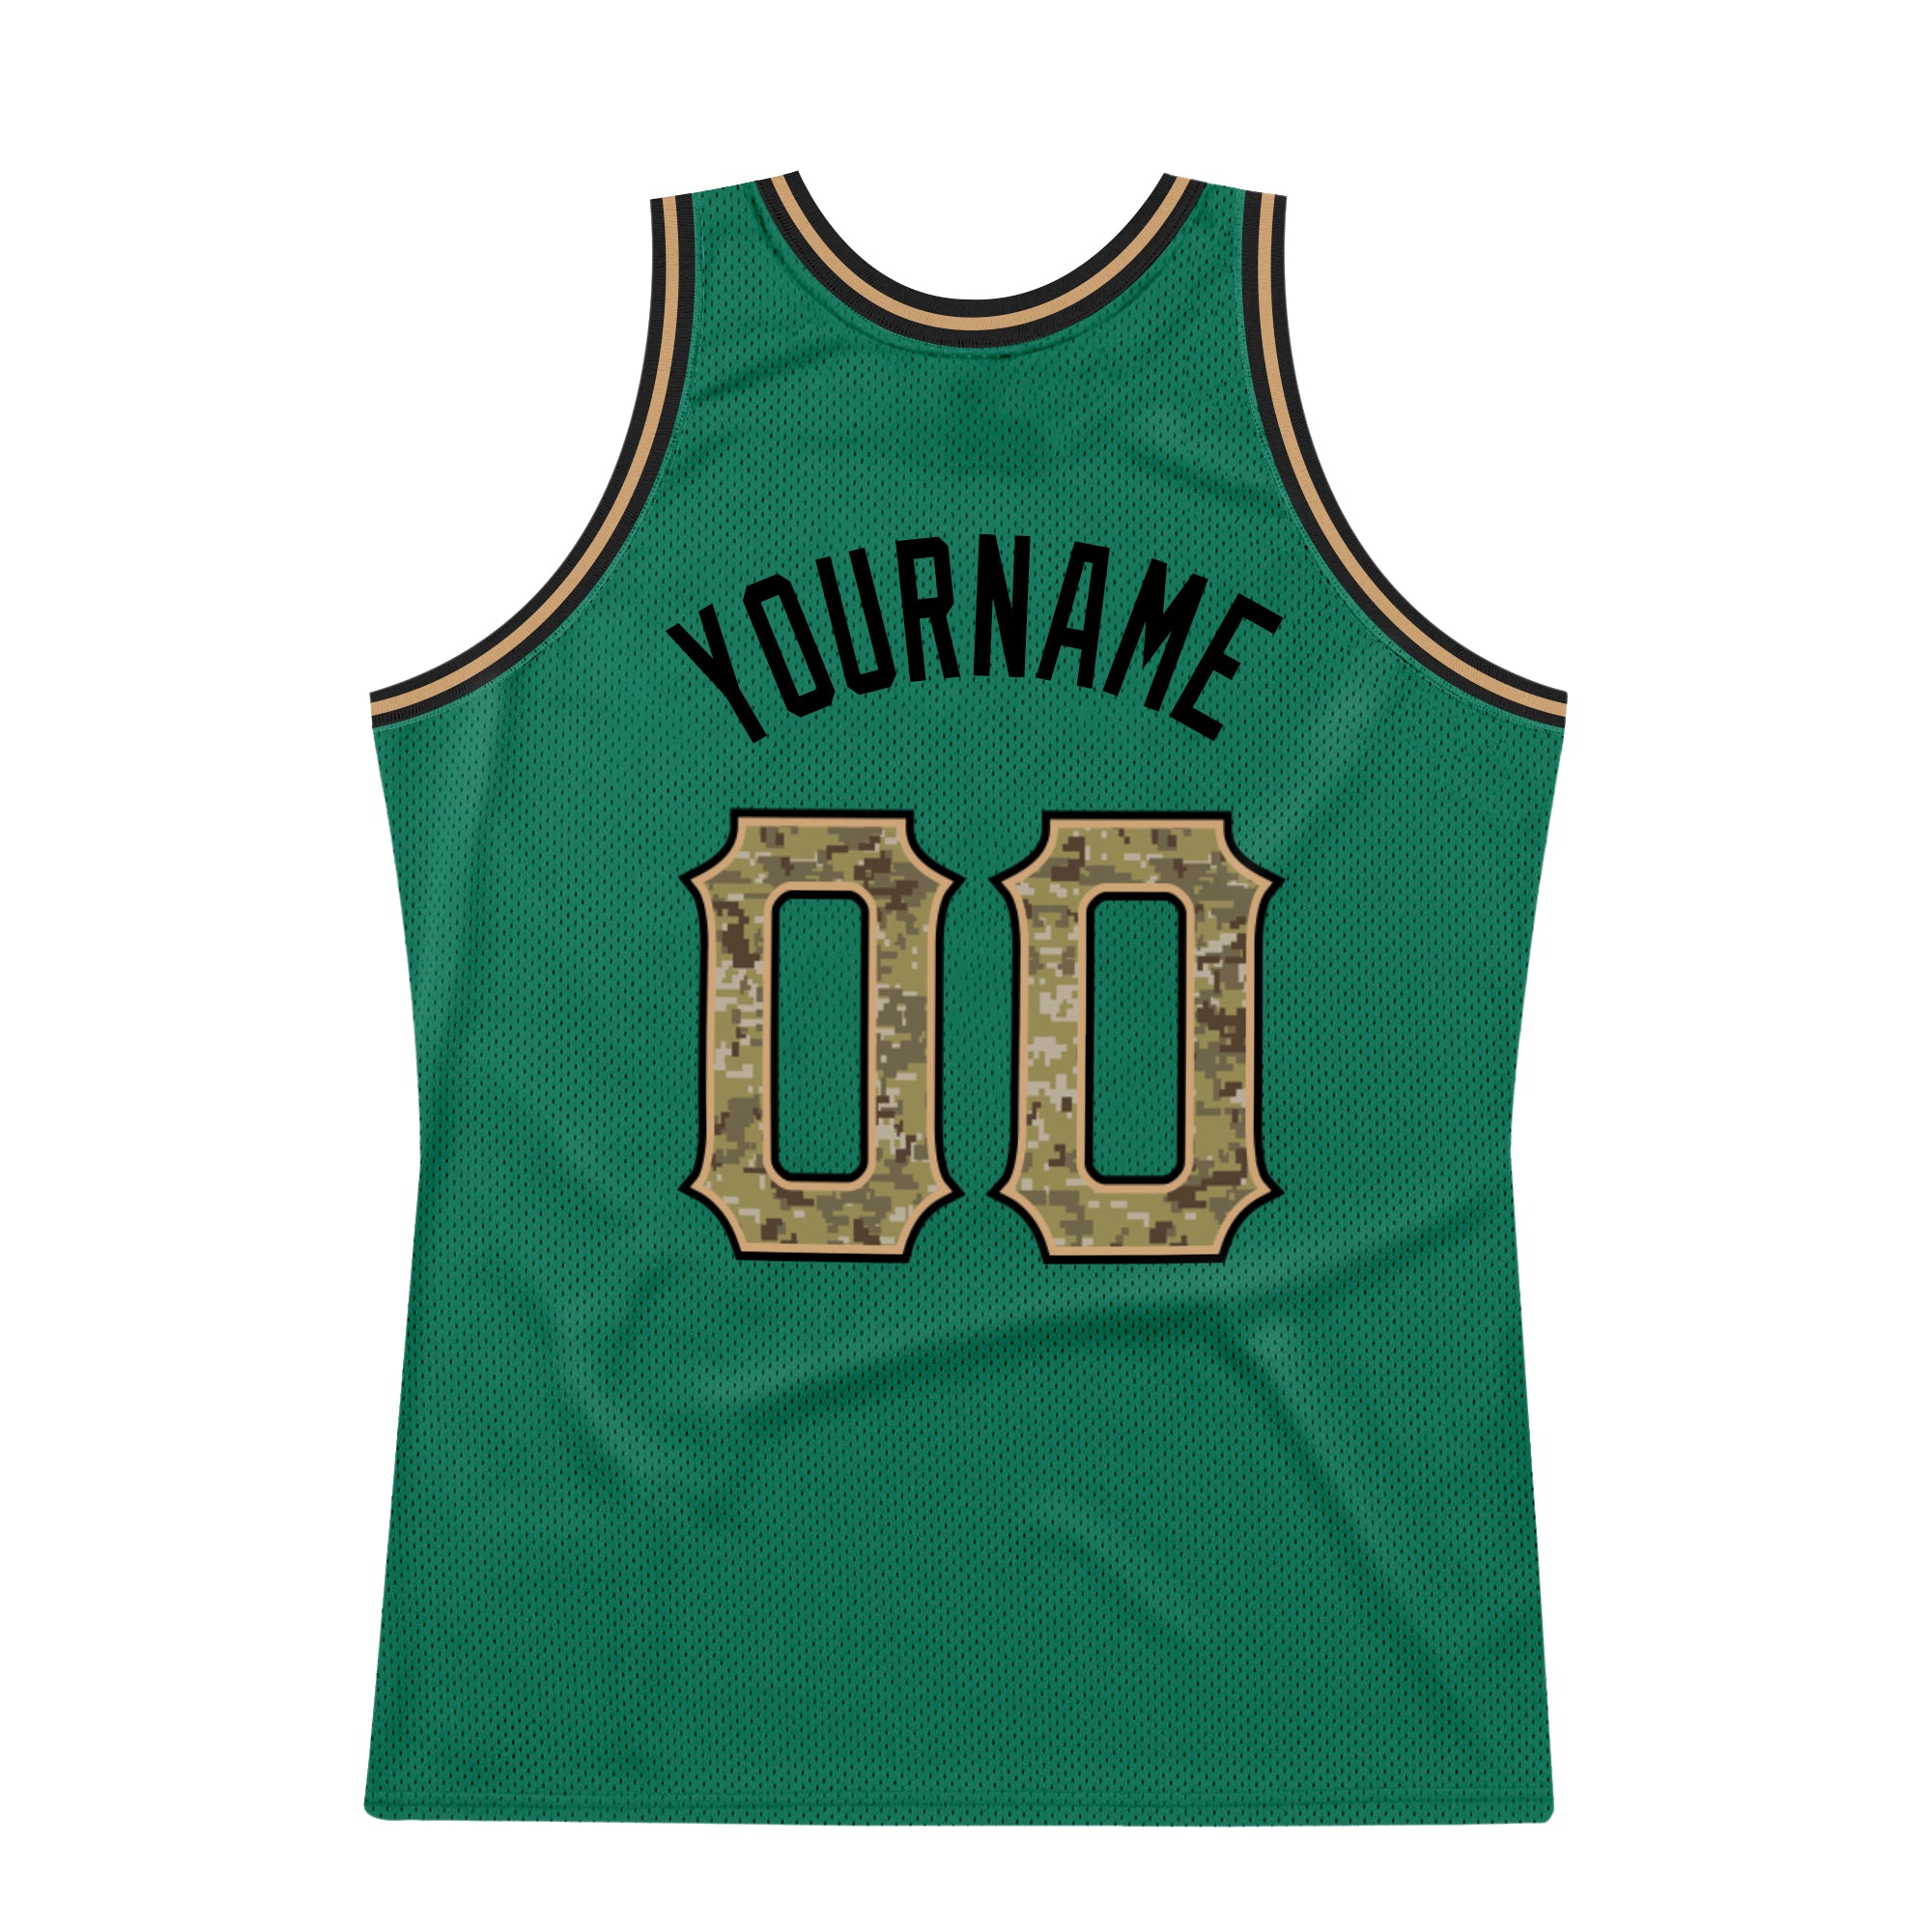 FANSIDEA Custom Black Black-Gold Authentic Throwback Basketball Jersey Youth Size:L